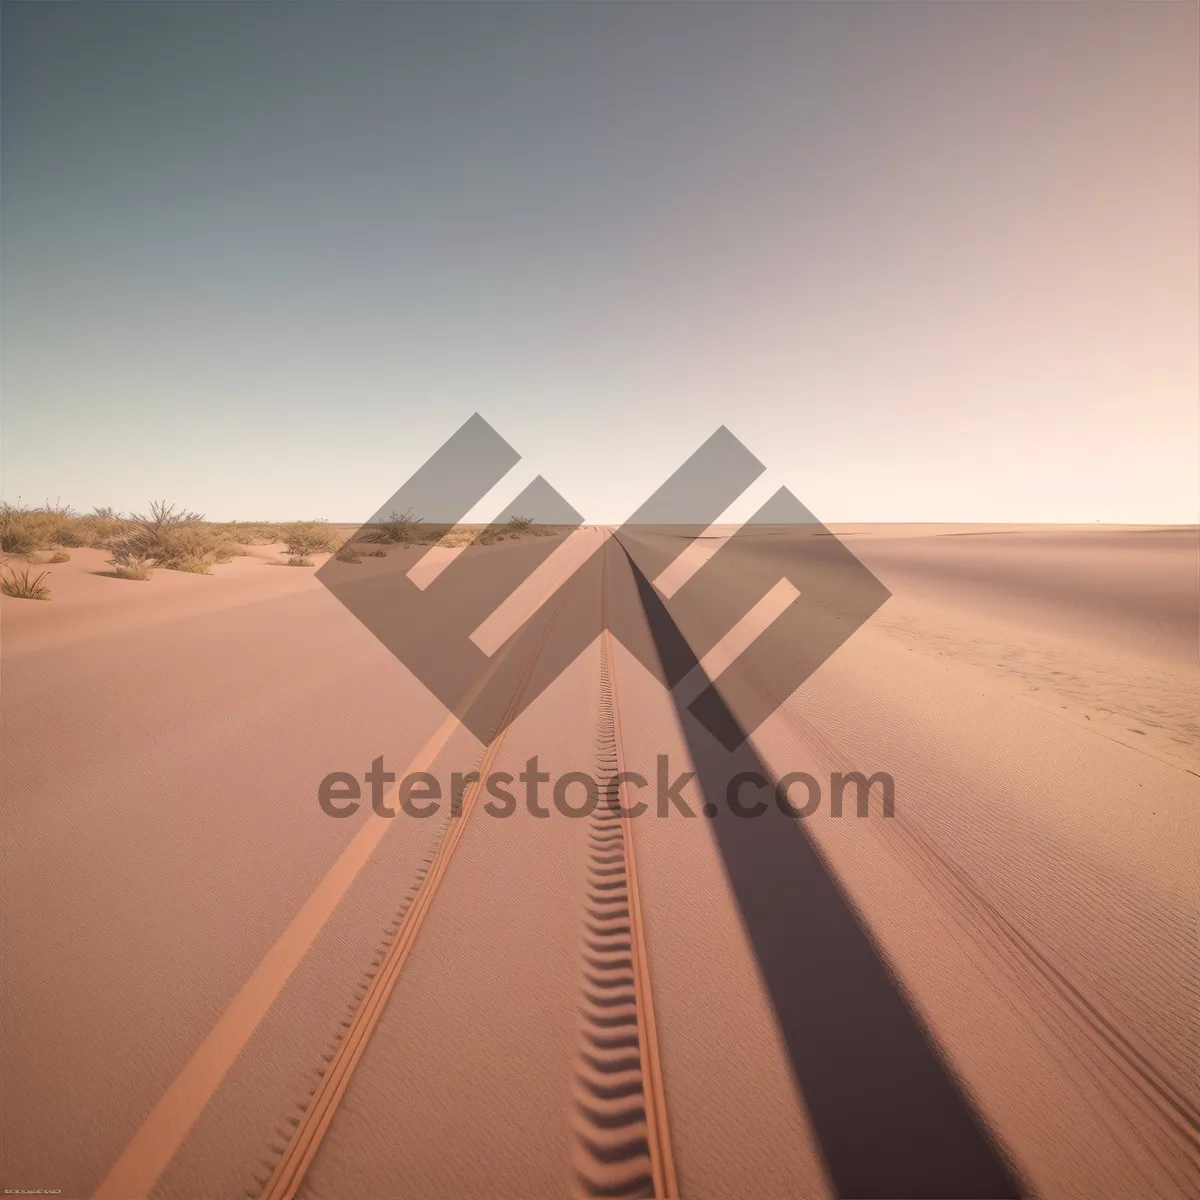 Picture of Desert Highway: Endless Road to Adventure